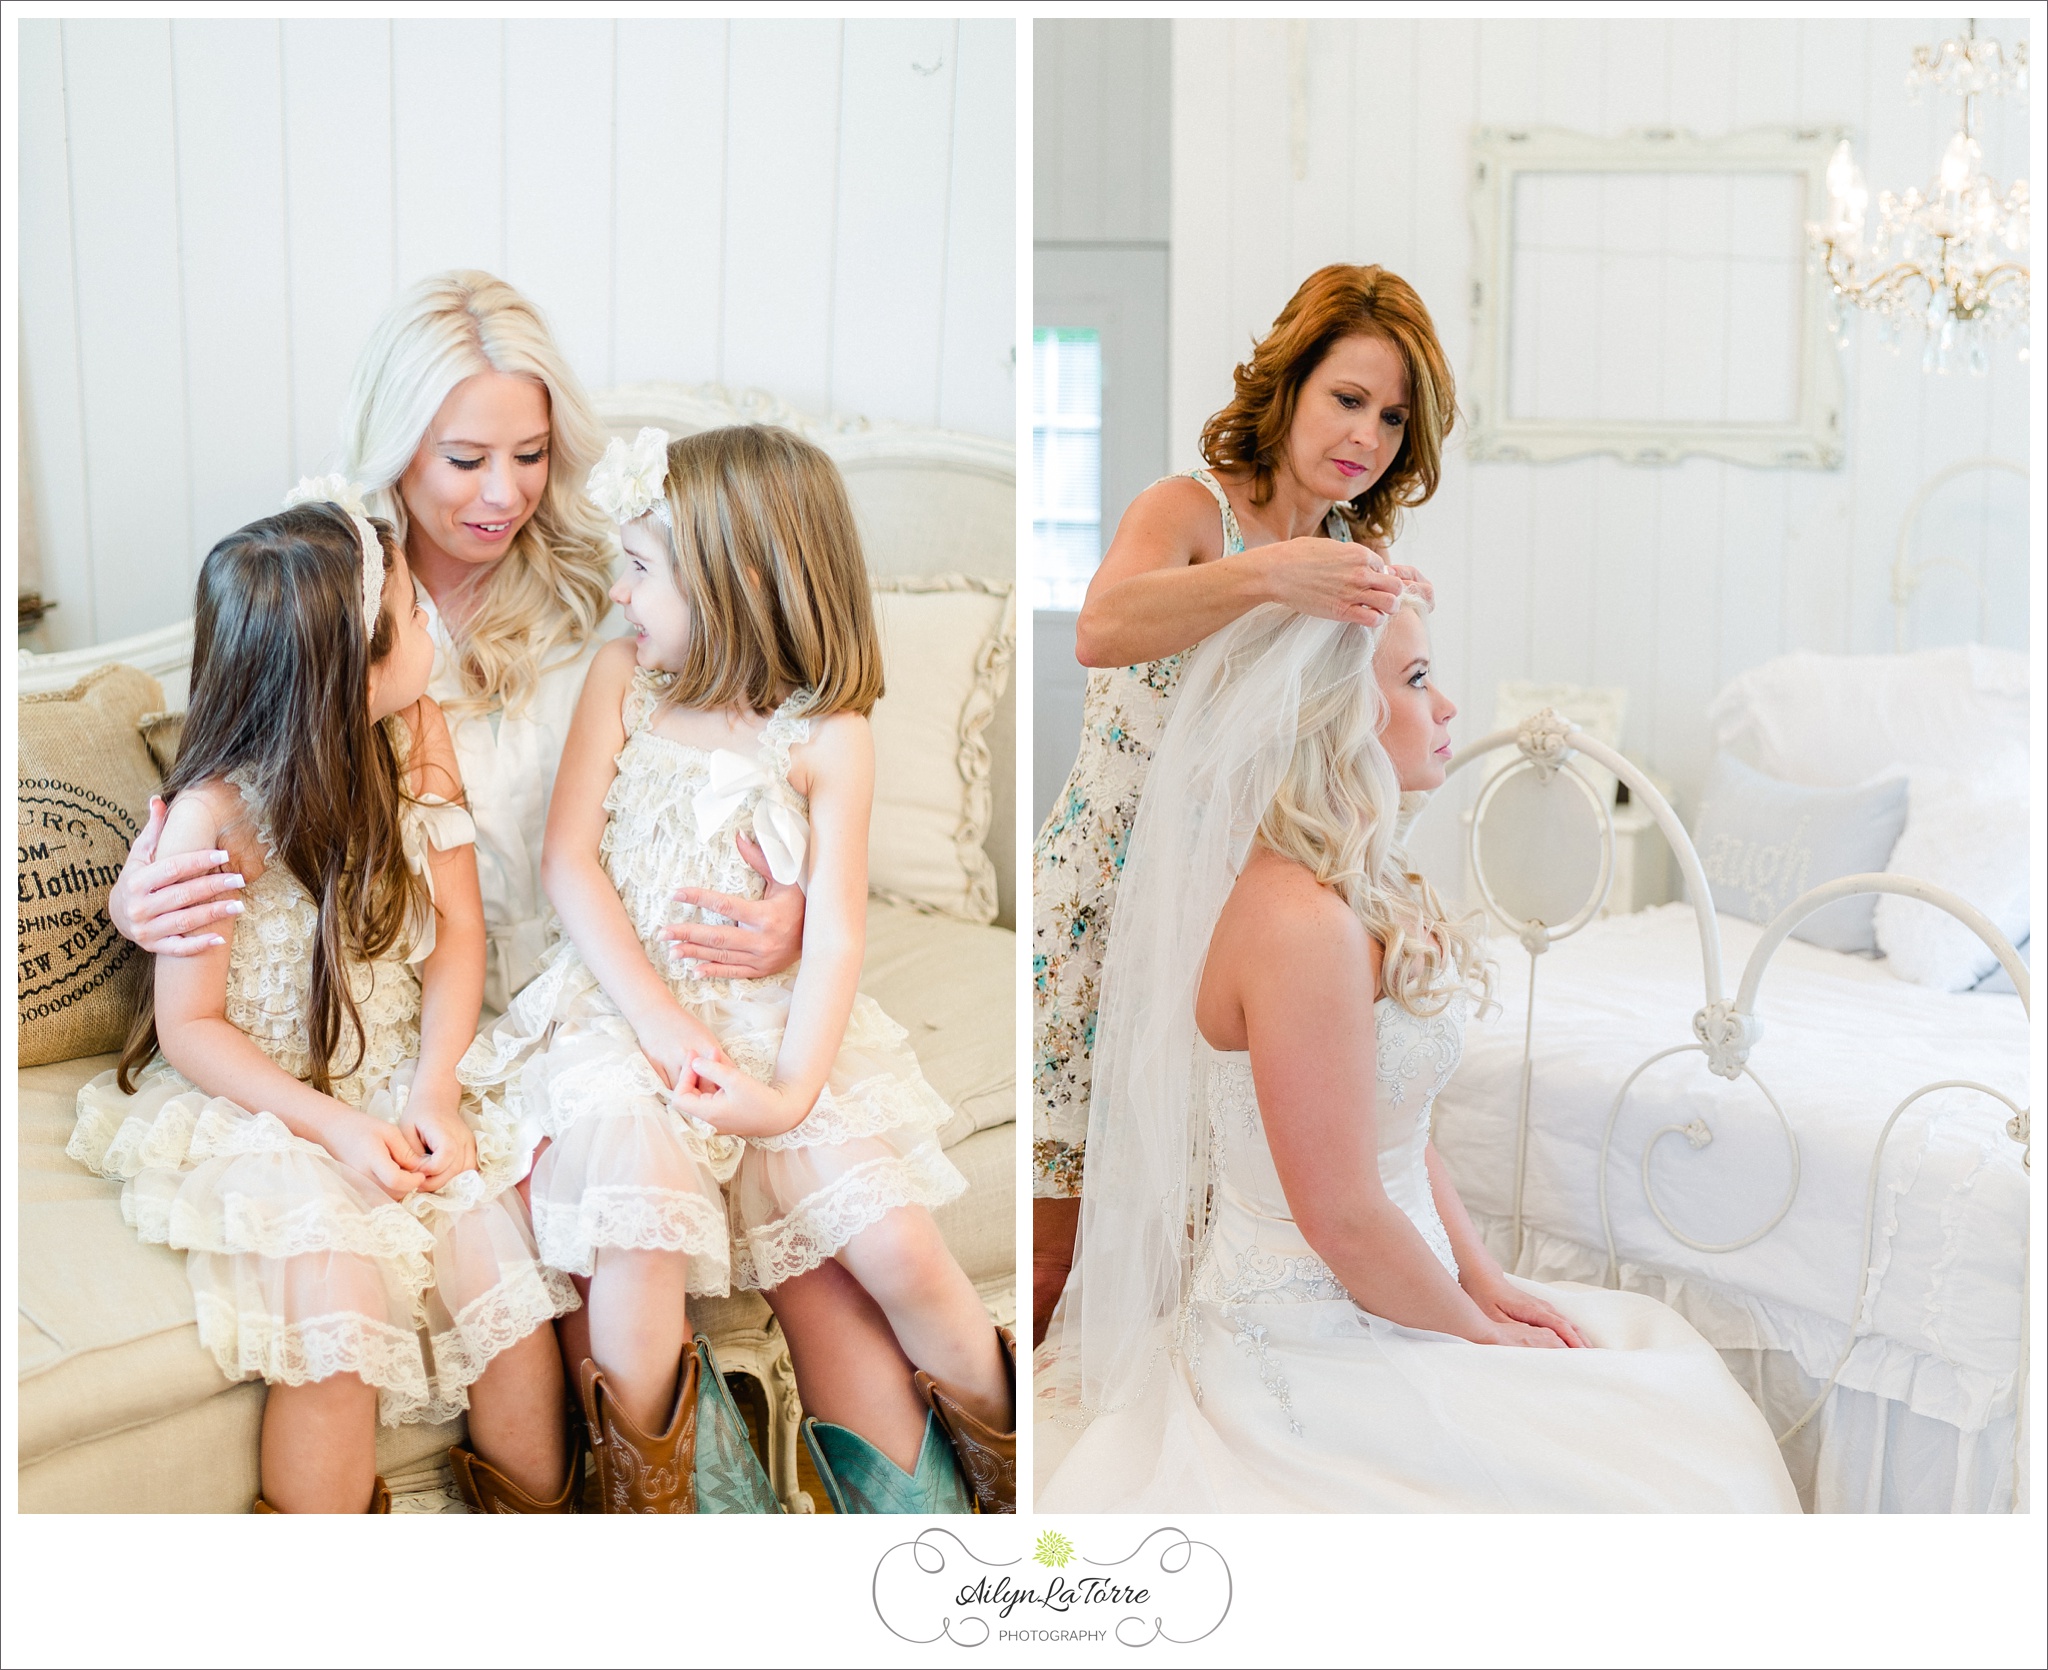 The Southern Barn Wedding | © Ailyn La Torre Photography 2015